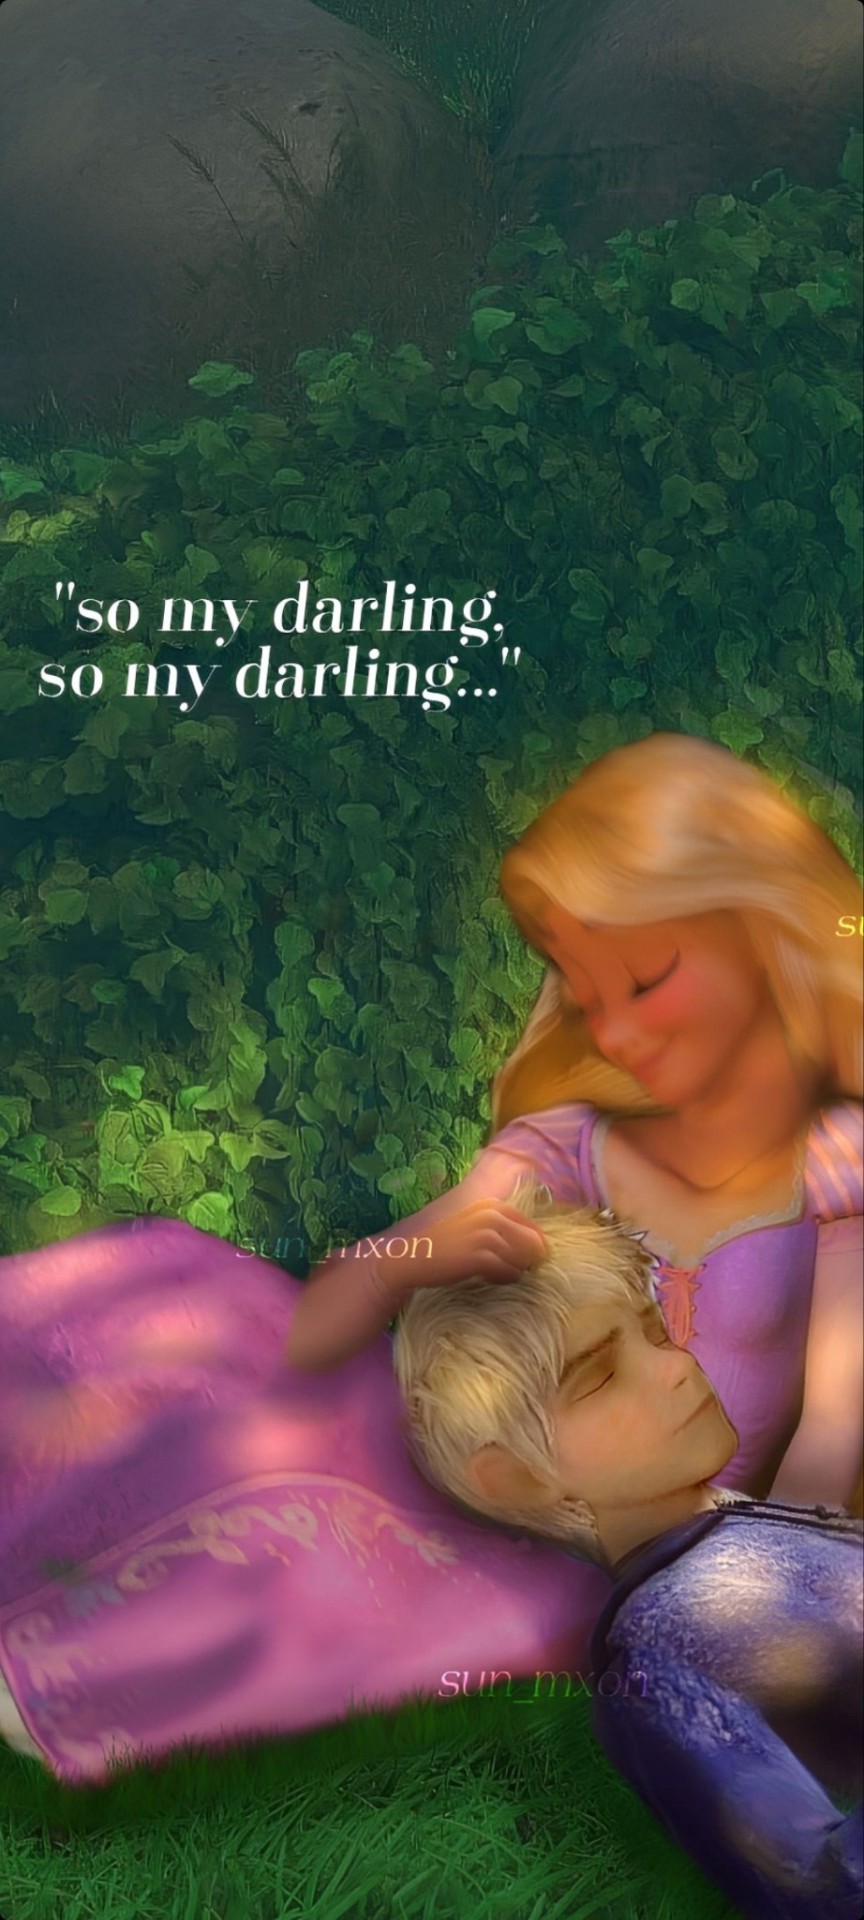 Tangled's Rapunzel and her baby. - Rapunzel